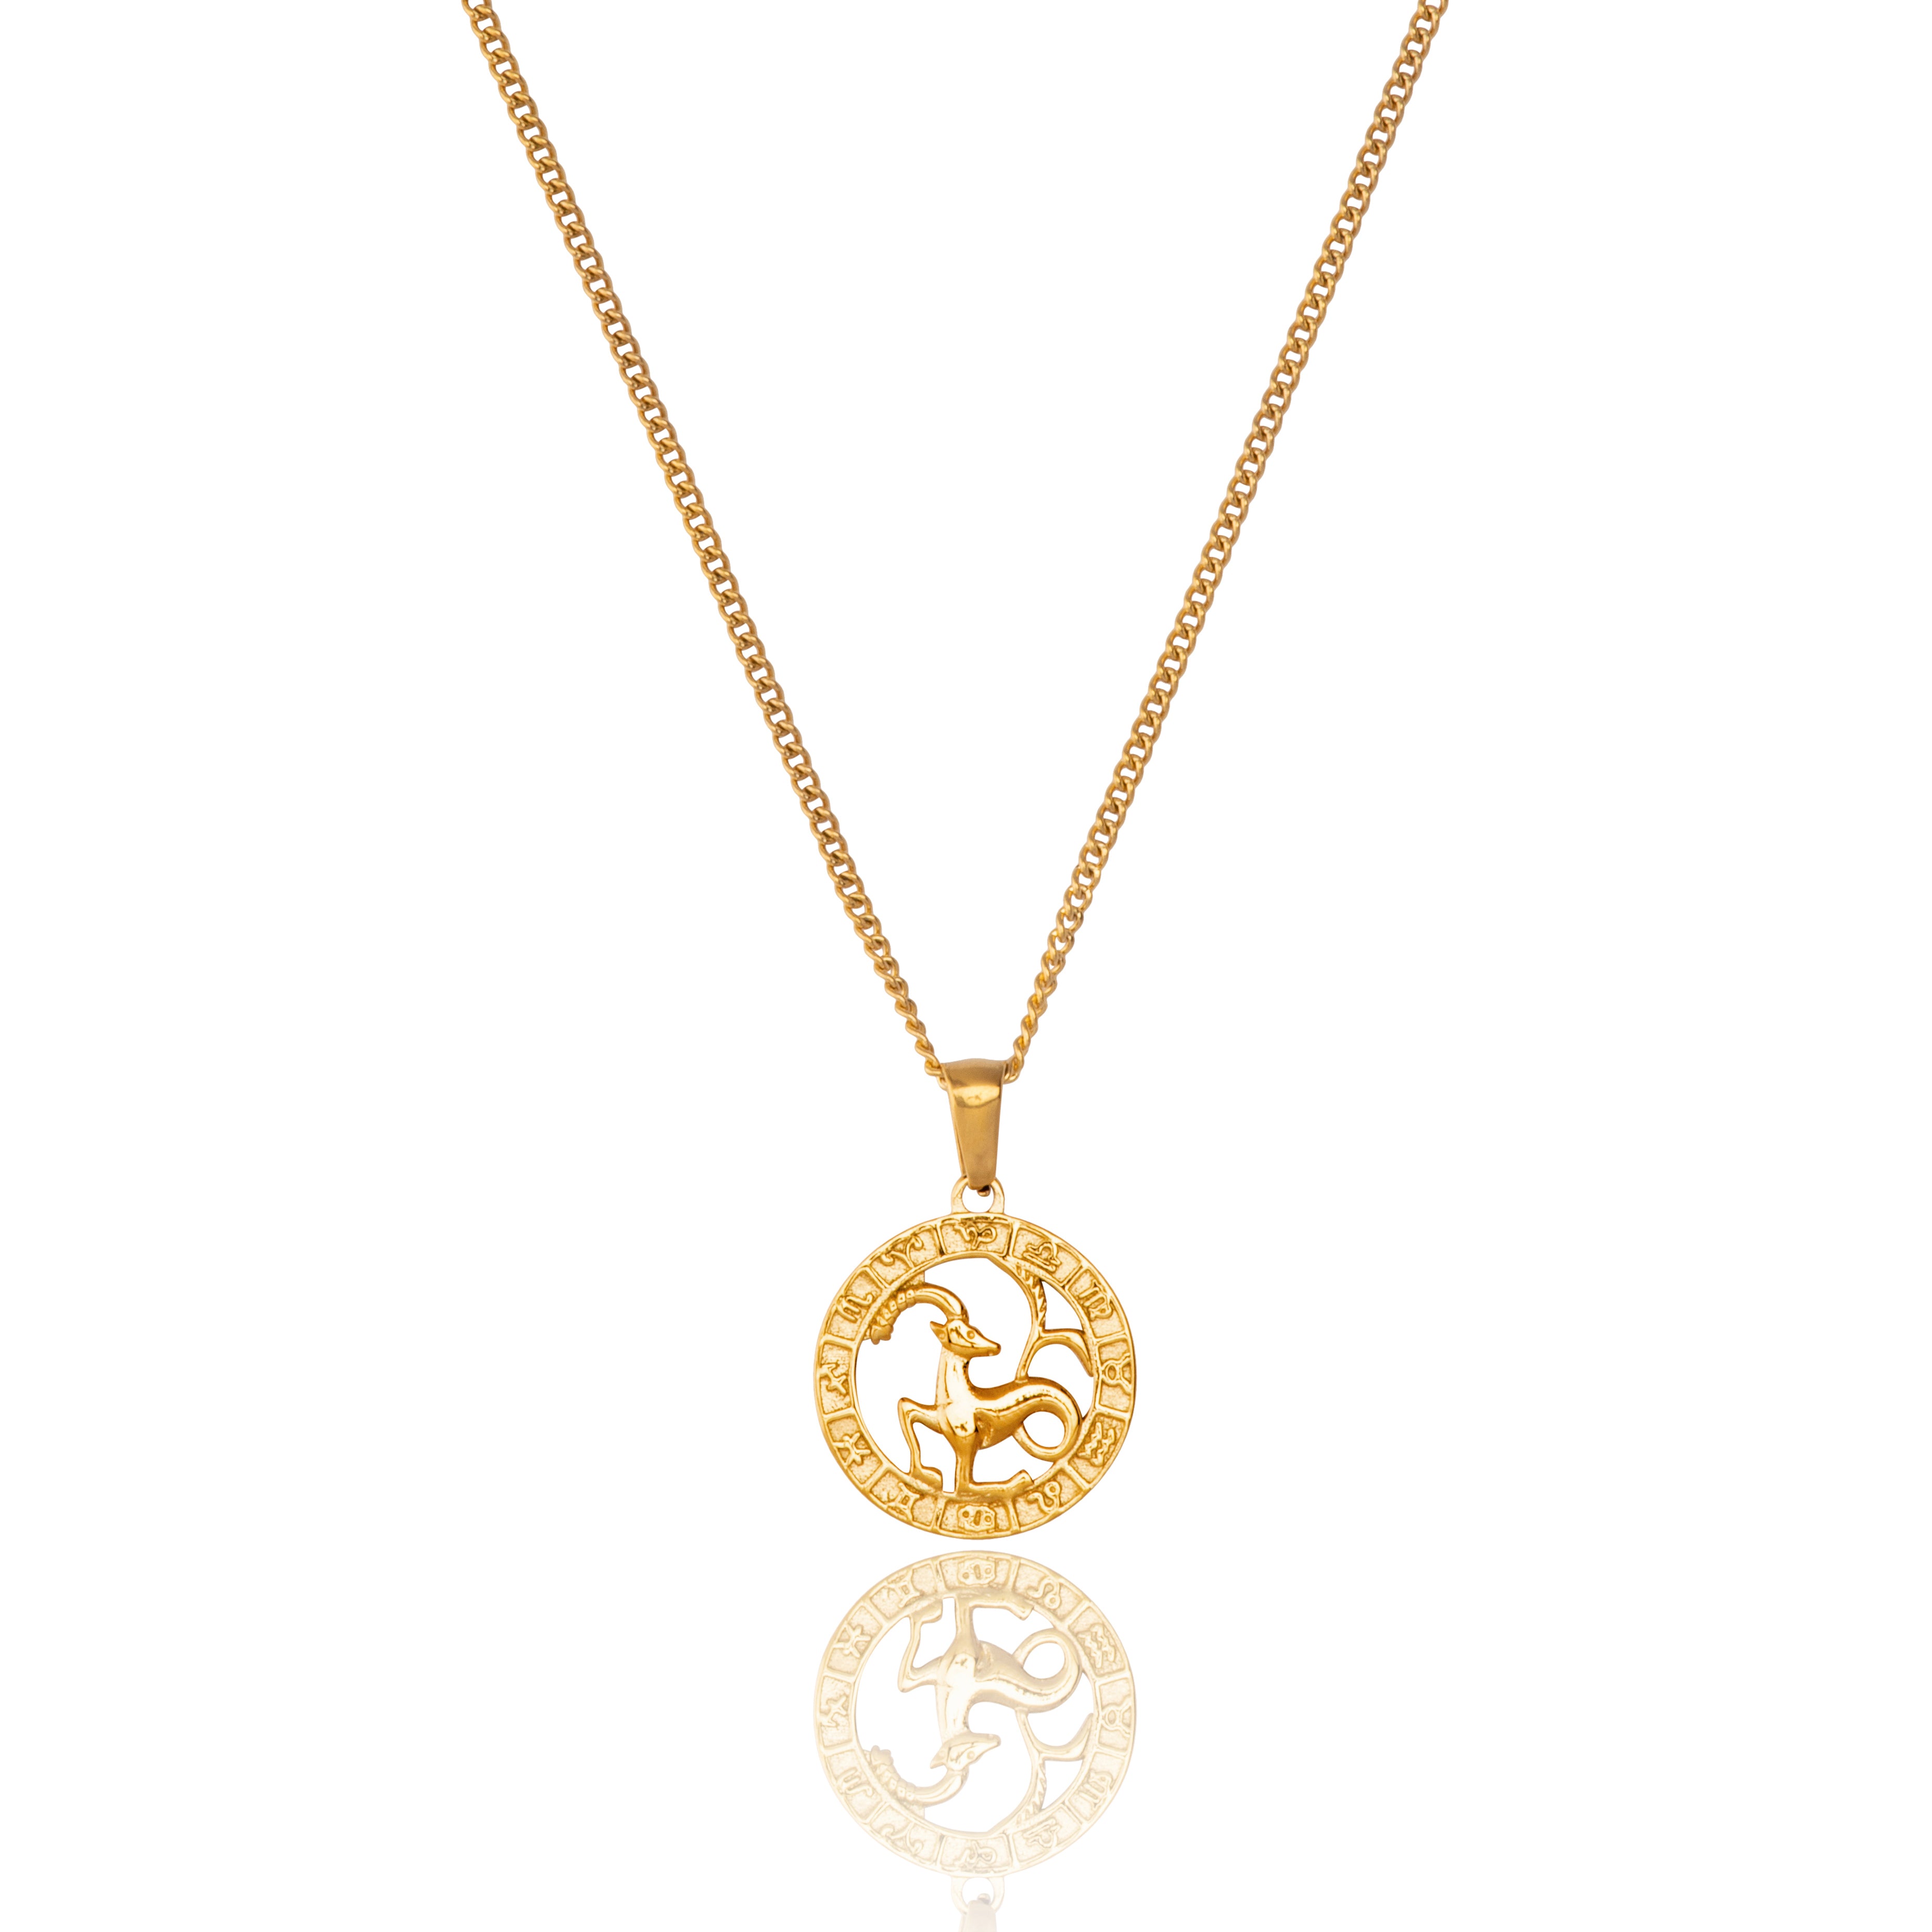 18K Gold Plated Capricorn Zodiac Star Sign Pendant and Chain